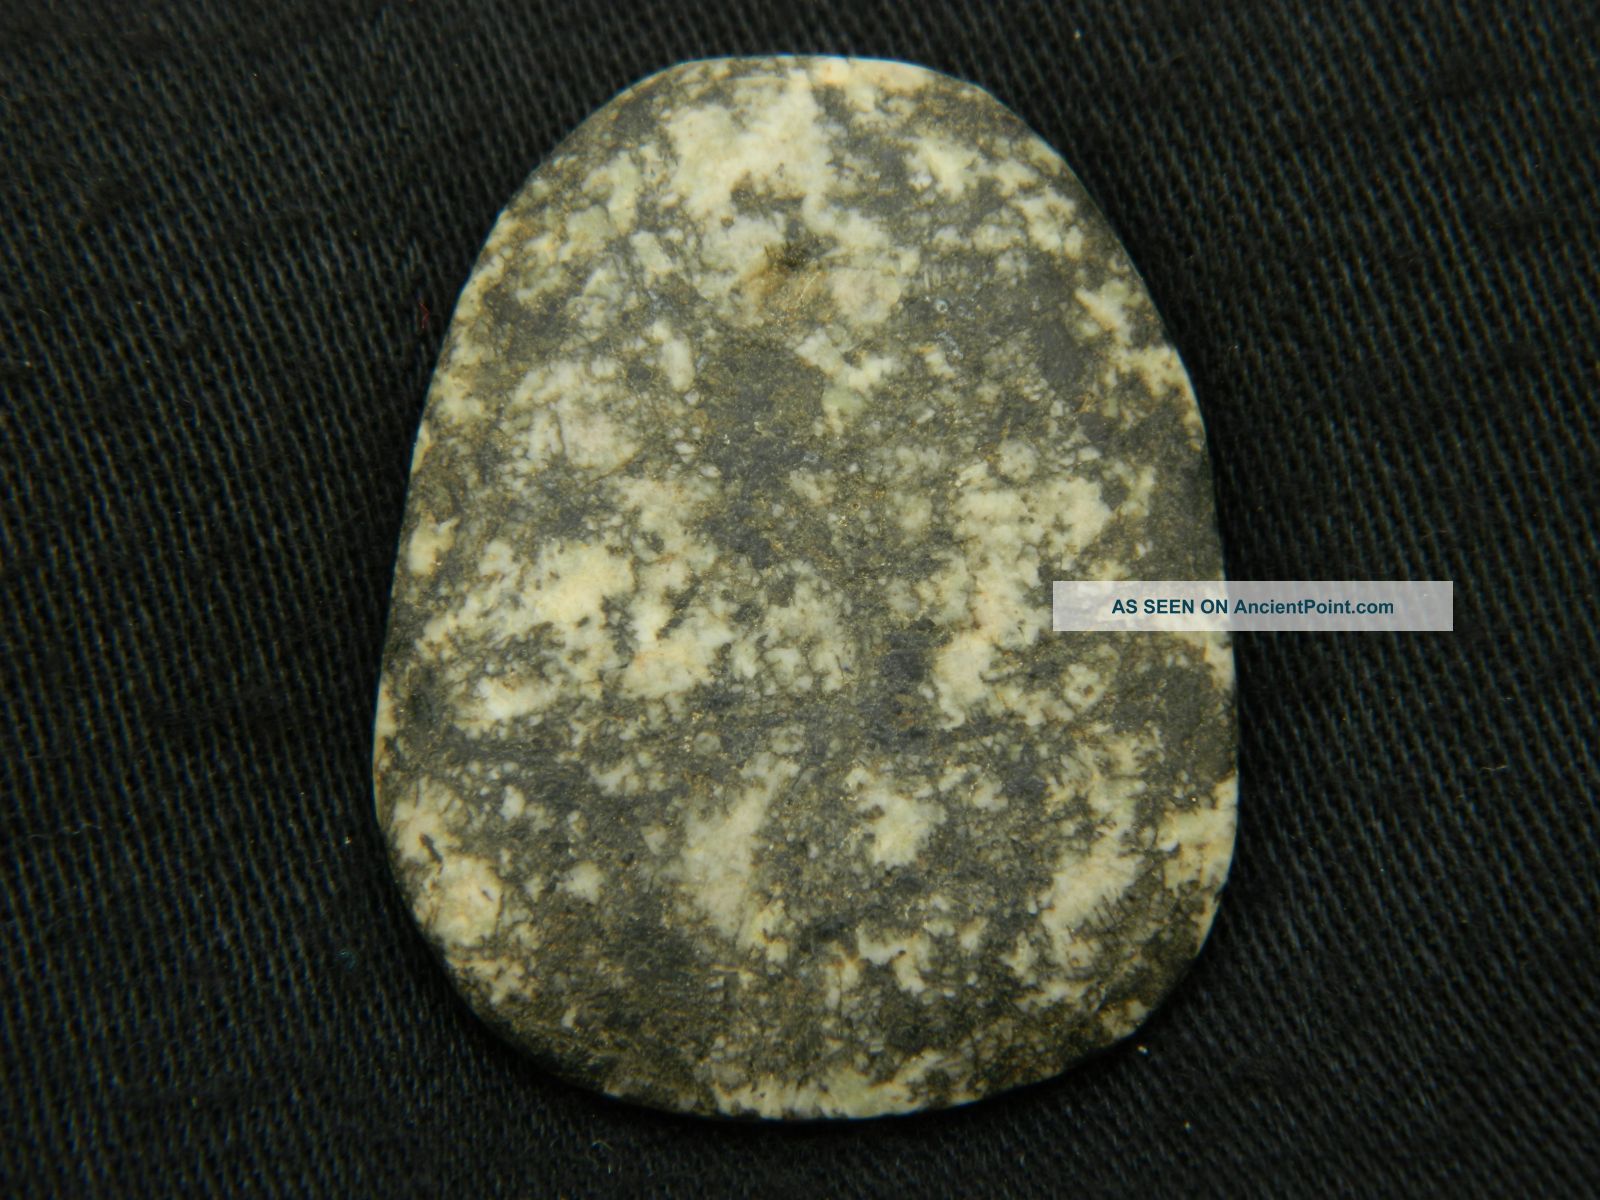 Neolithic Neolithique Diorite Pendant - 6500 To 2000 Before Present - Sahara Neolithic & Paleolithic photo